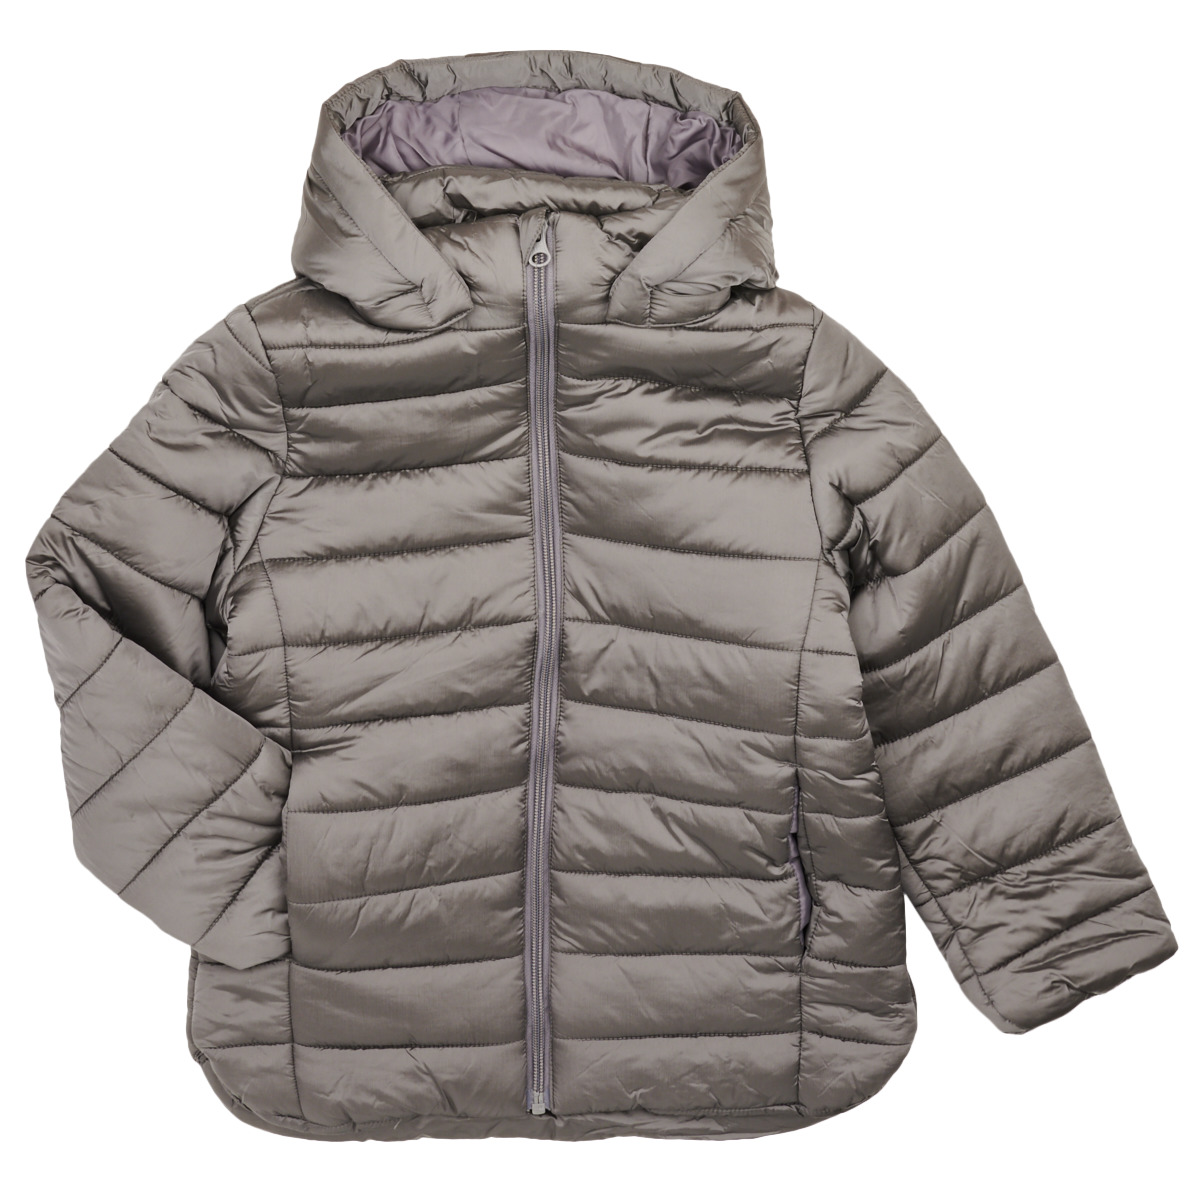 PUFFER Free - Name NET coats Duffel NKFMADIA it Spartoo delivery ! - Clothing Child JACKET Grey |